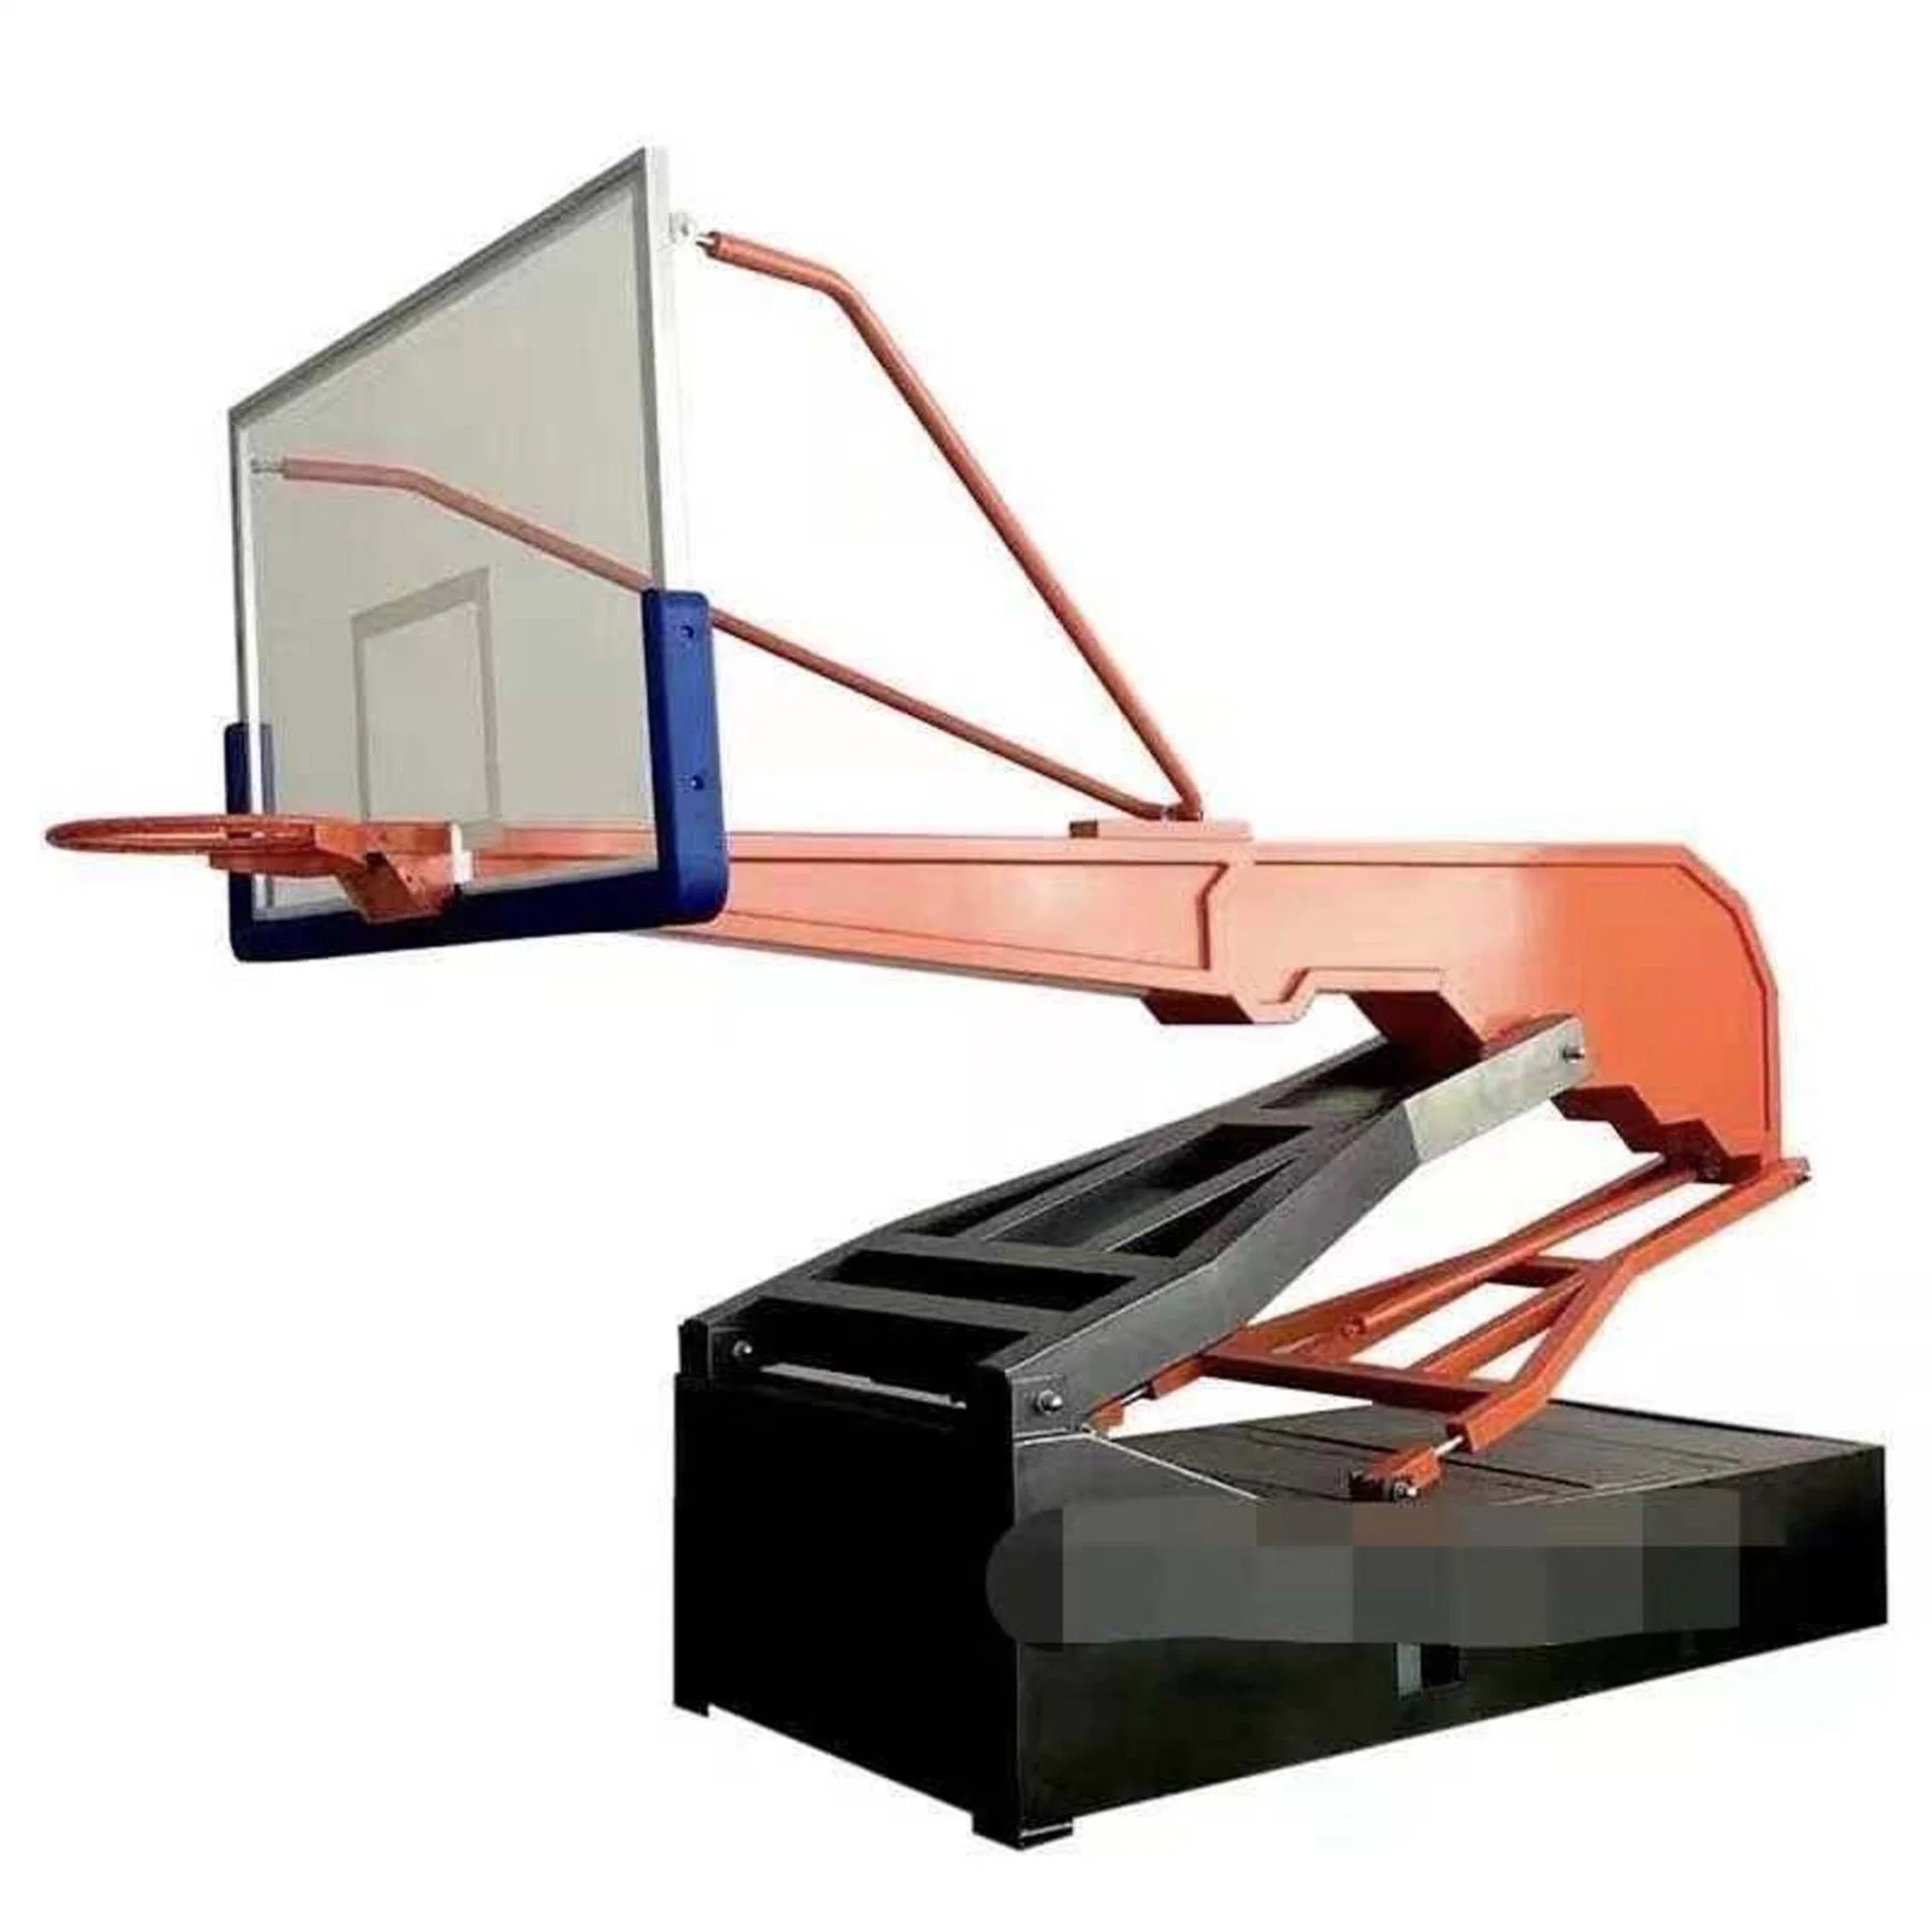 Multiple Colour Intelligent Telecontrol Hydraulic Foldable Basketball Hoop Goal / Stand Standard Tempered Glass Backboard for Indoor / Outdoor